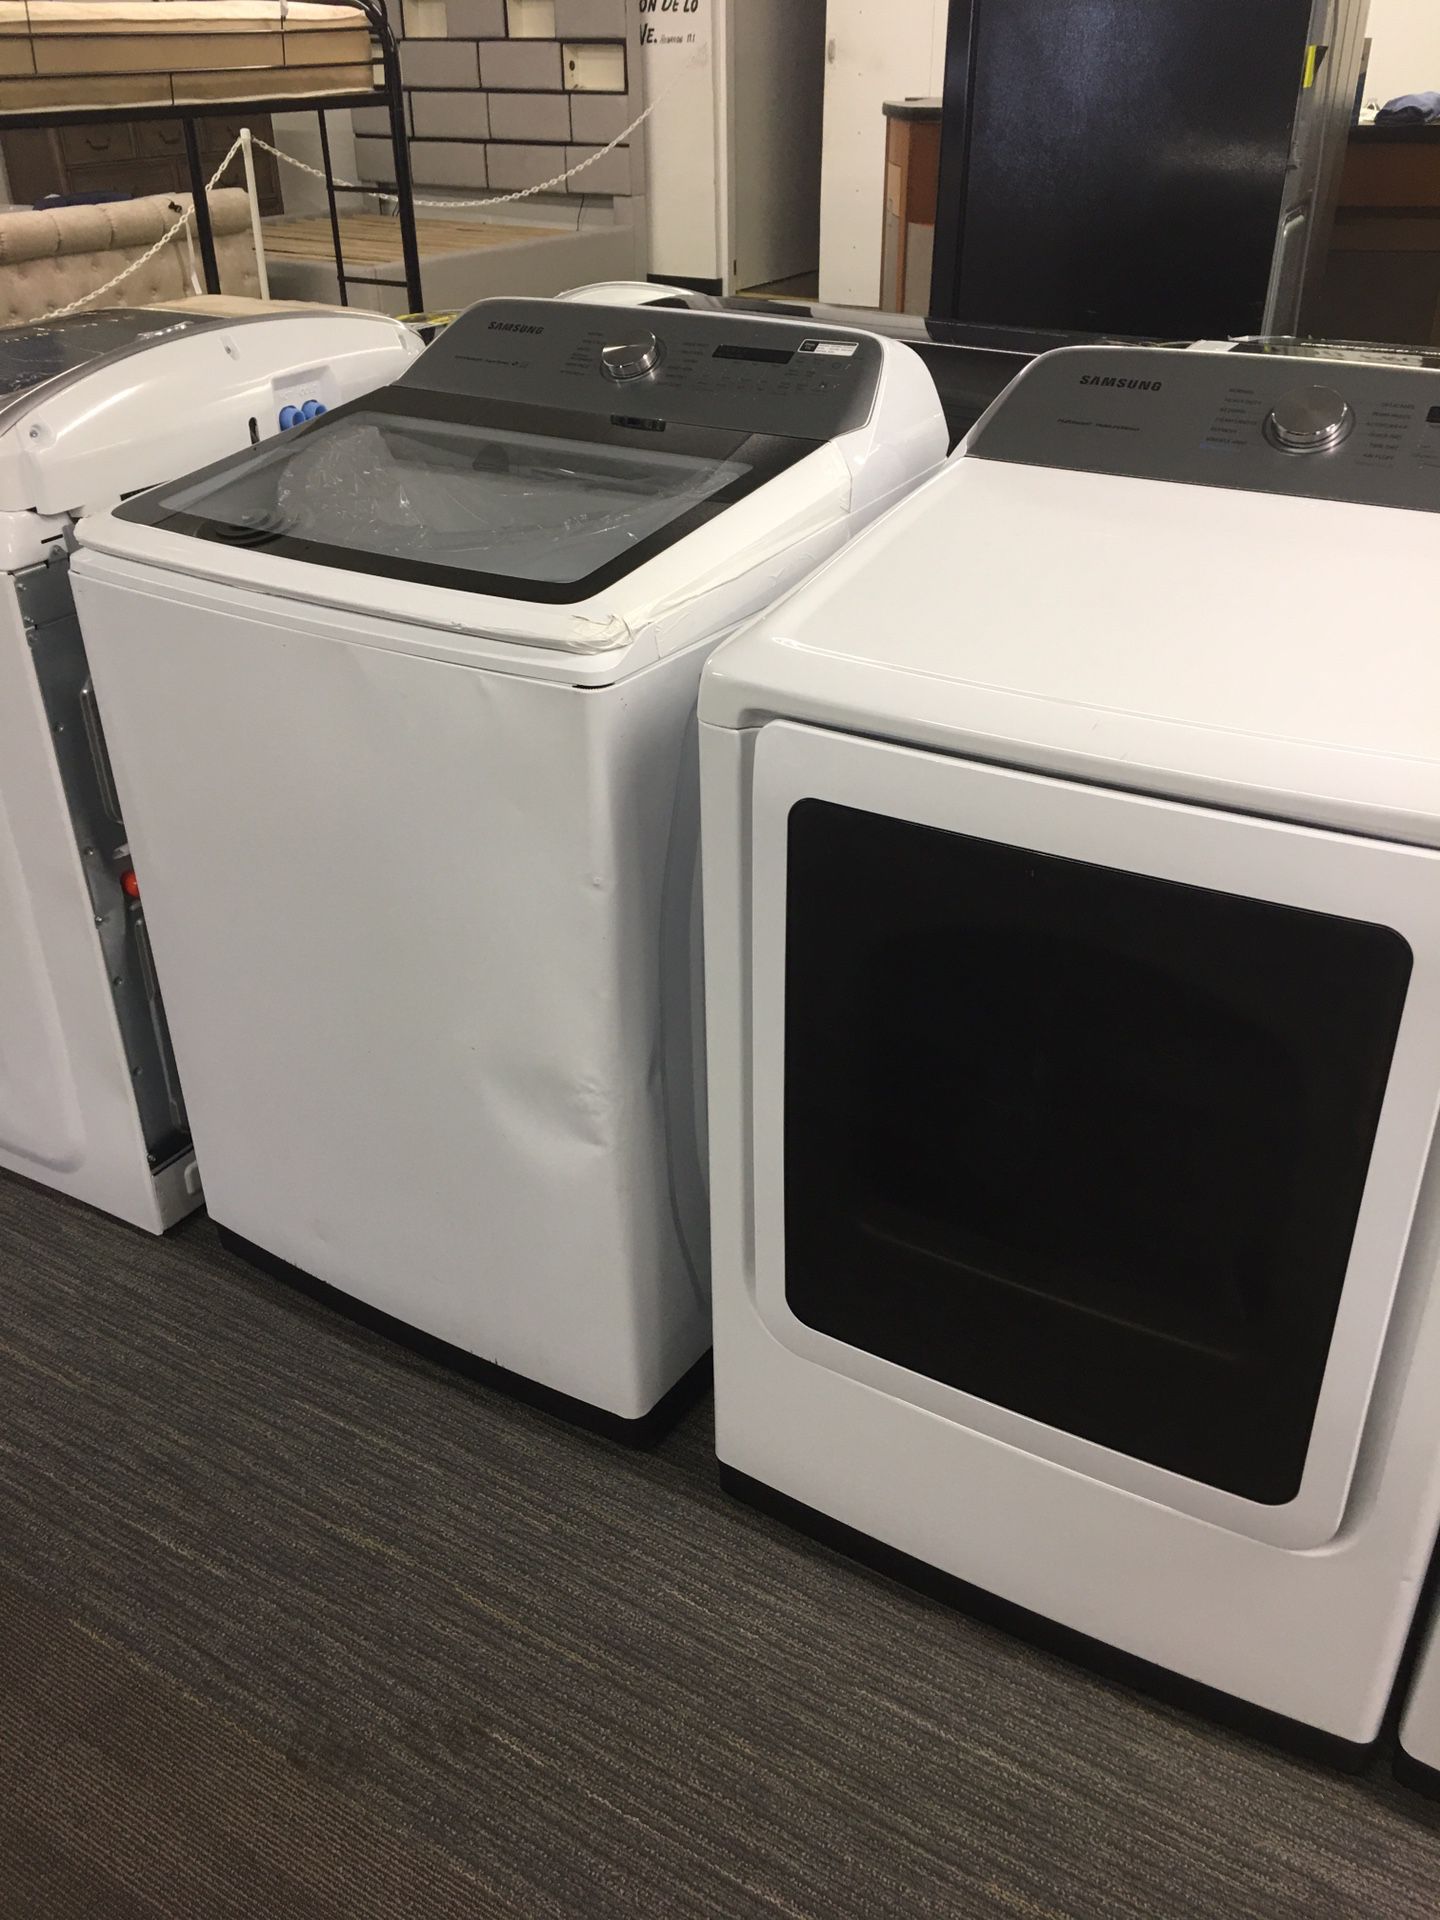 Samsung Brand New Set Washer And Dye King Size Capacity With Warranty Scraches Dent No Credit Needed Just $49 Down payment Cash price $1,500